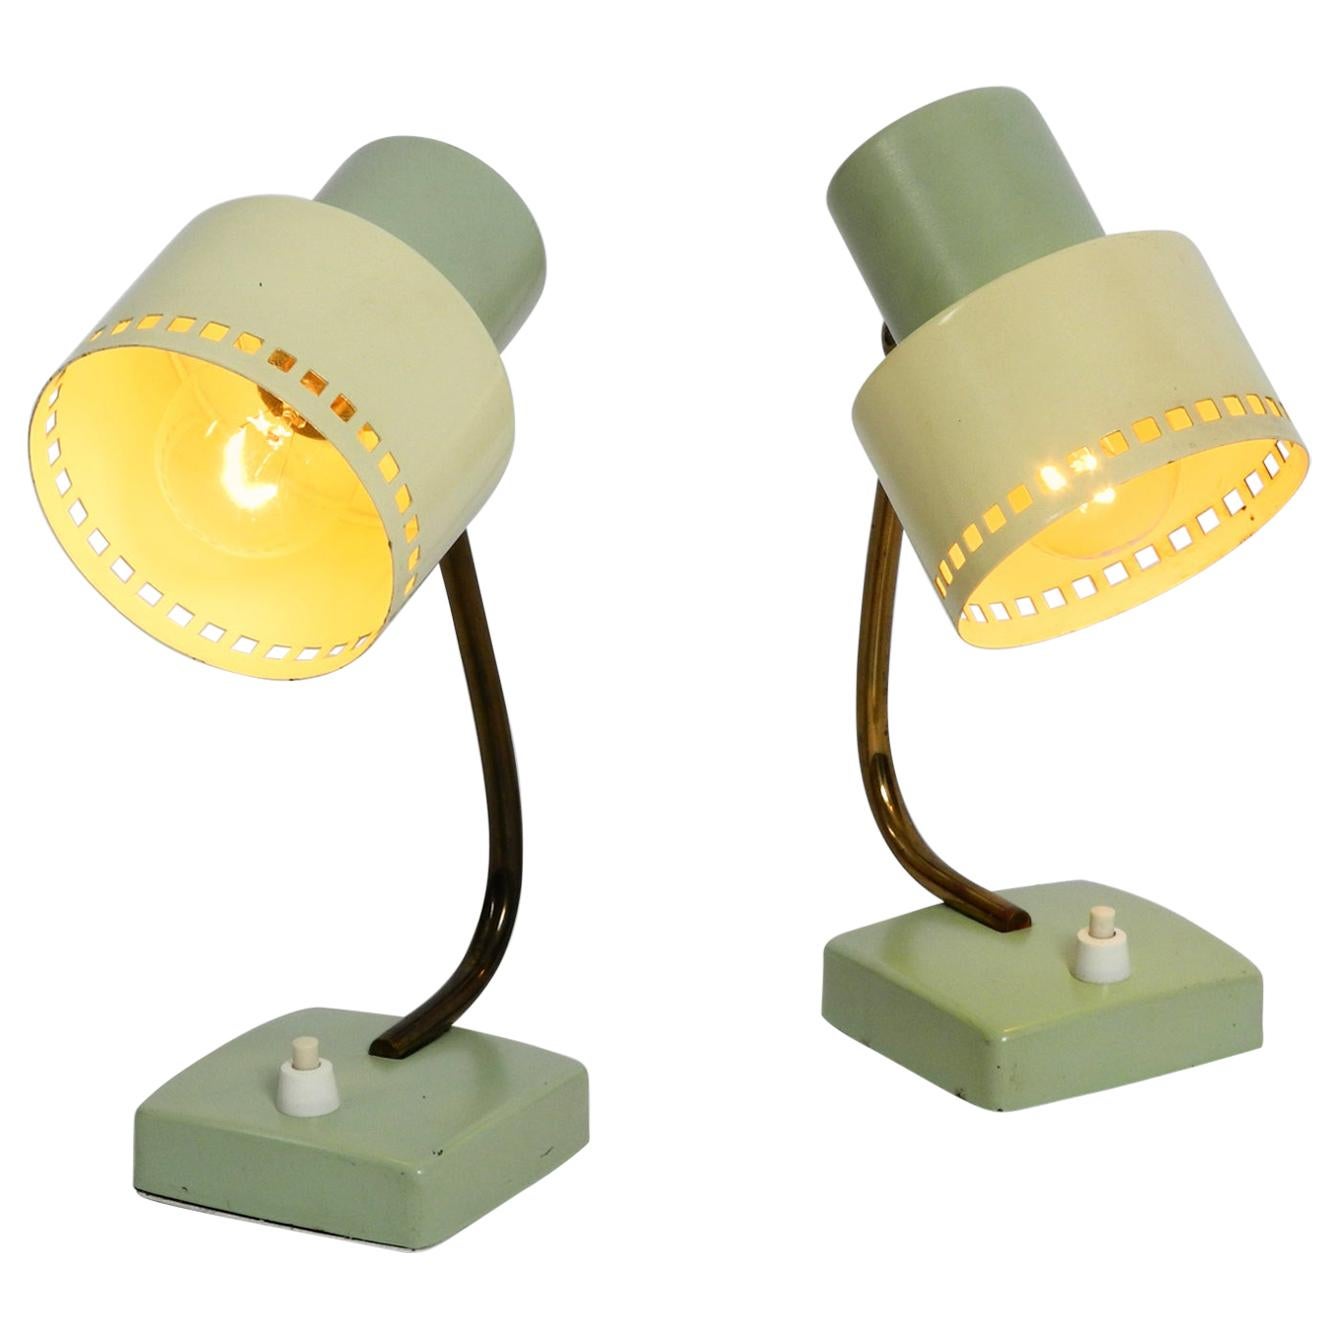 Pair of Beautiful Midcentury Metal Bedside Lamps in Mint Green and Yellow